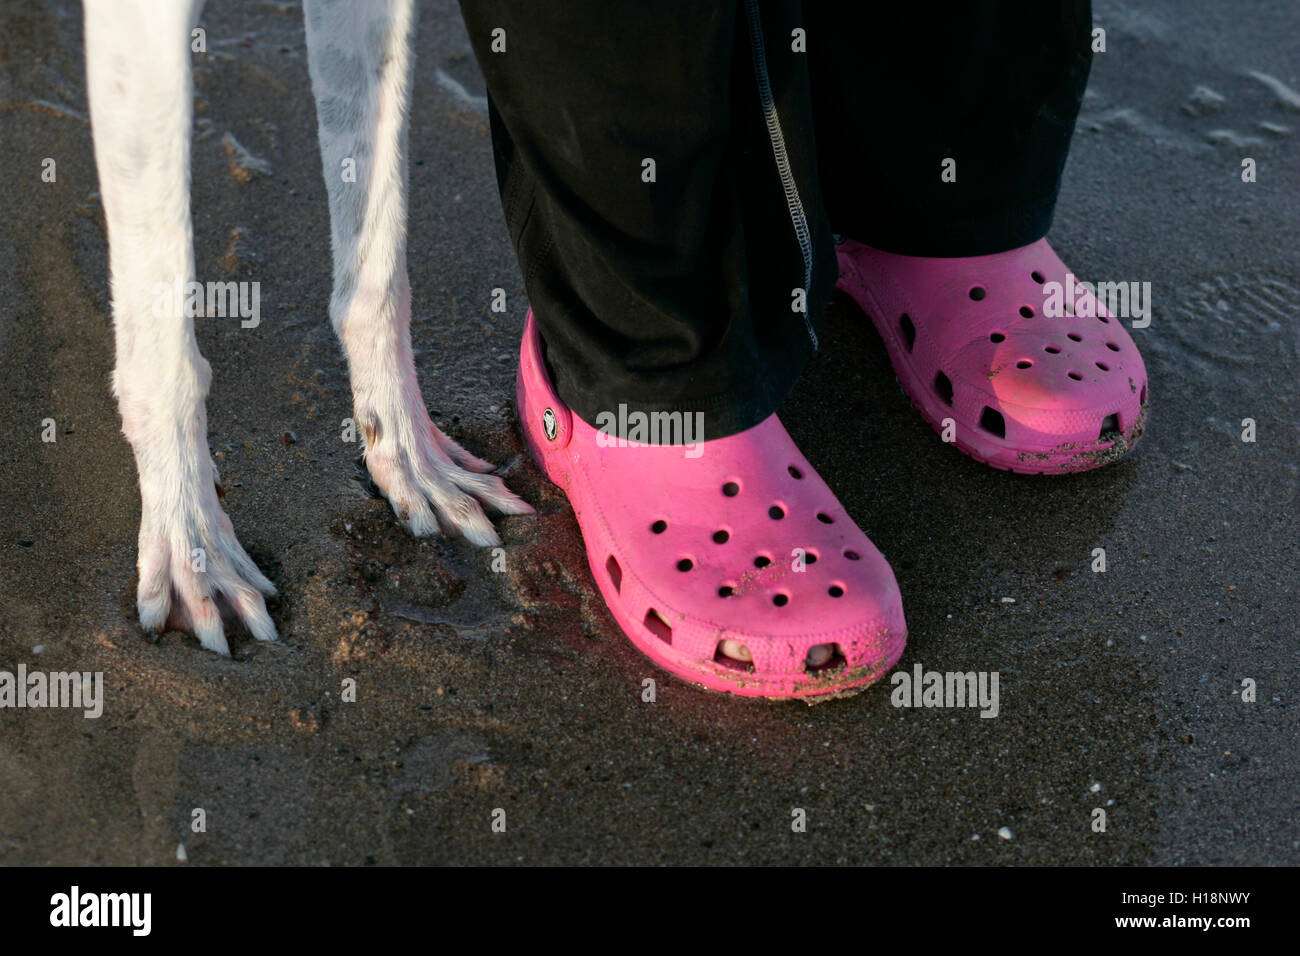 Two pairs of feet one human one dog, human is wearing pink shoes, the dog has white paws. Stock Photo